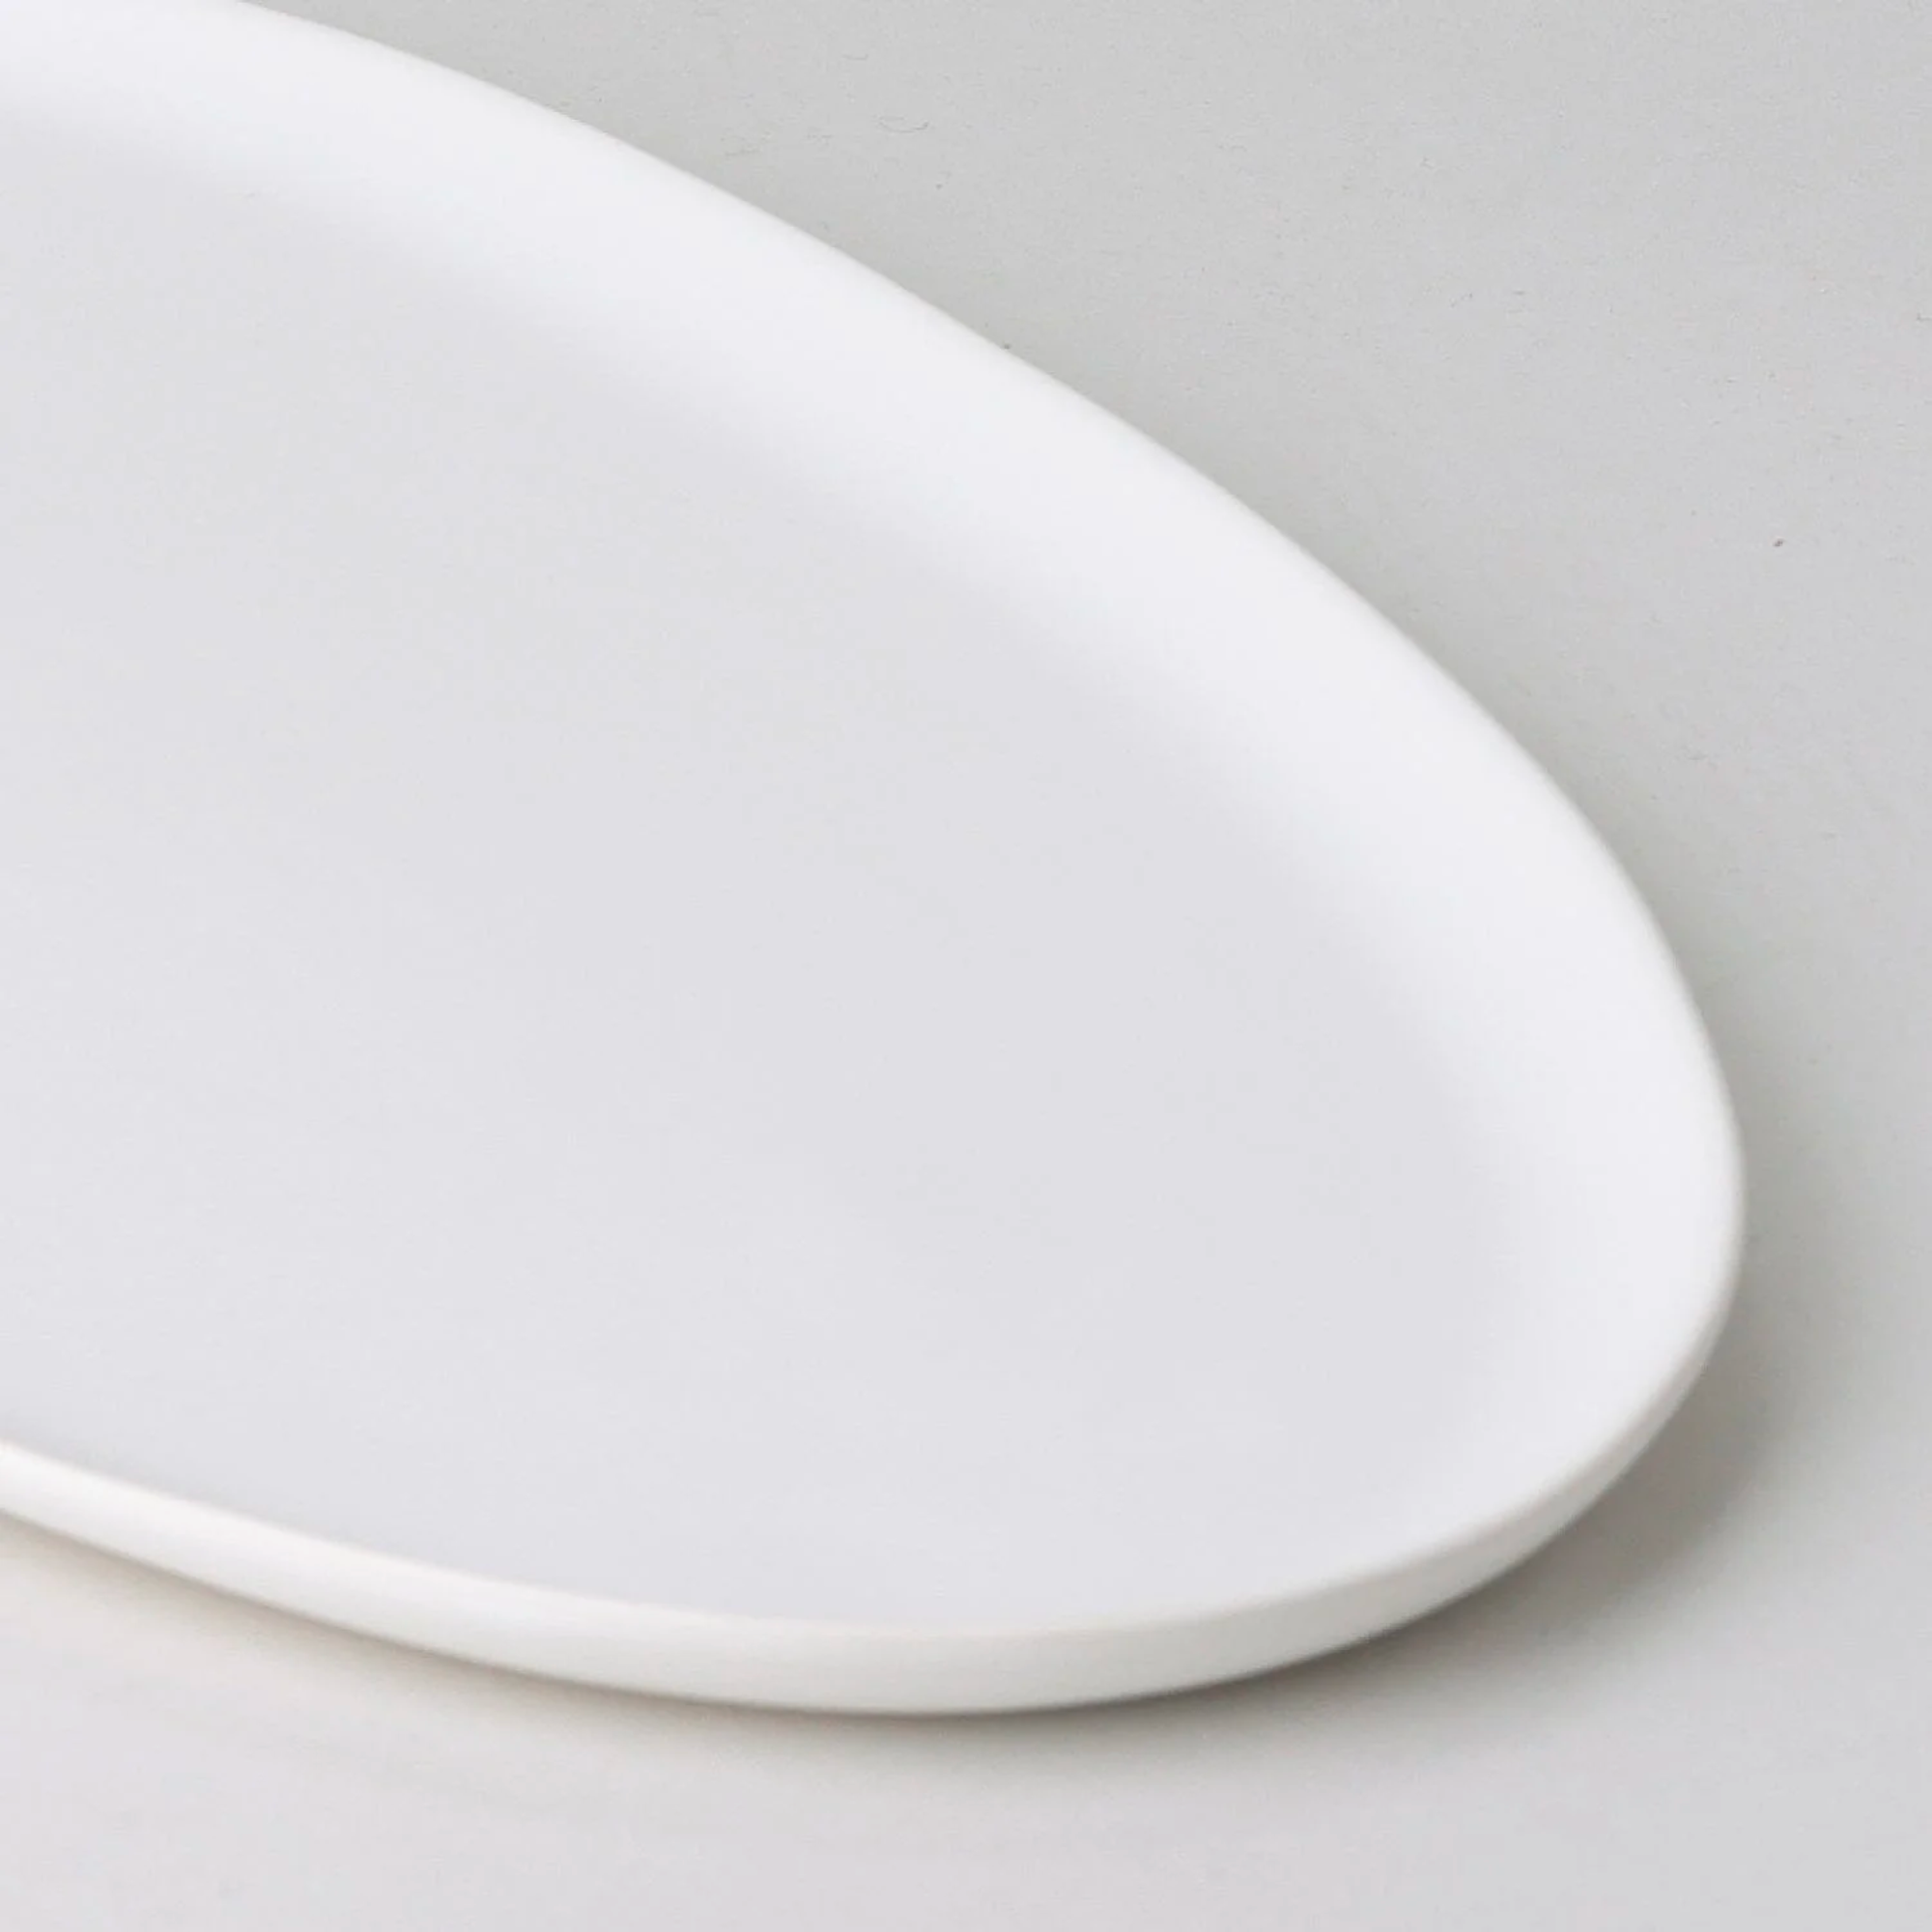 Fable Oval Platter - Cloud White